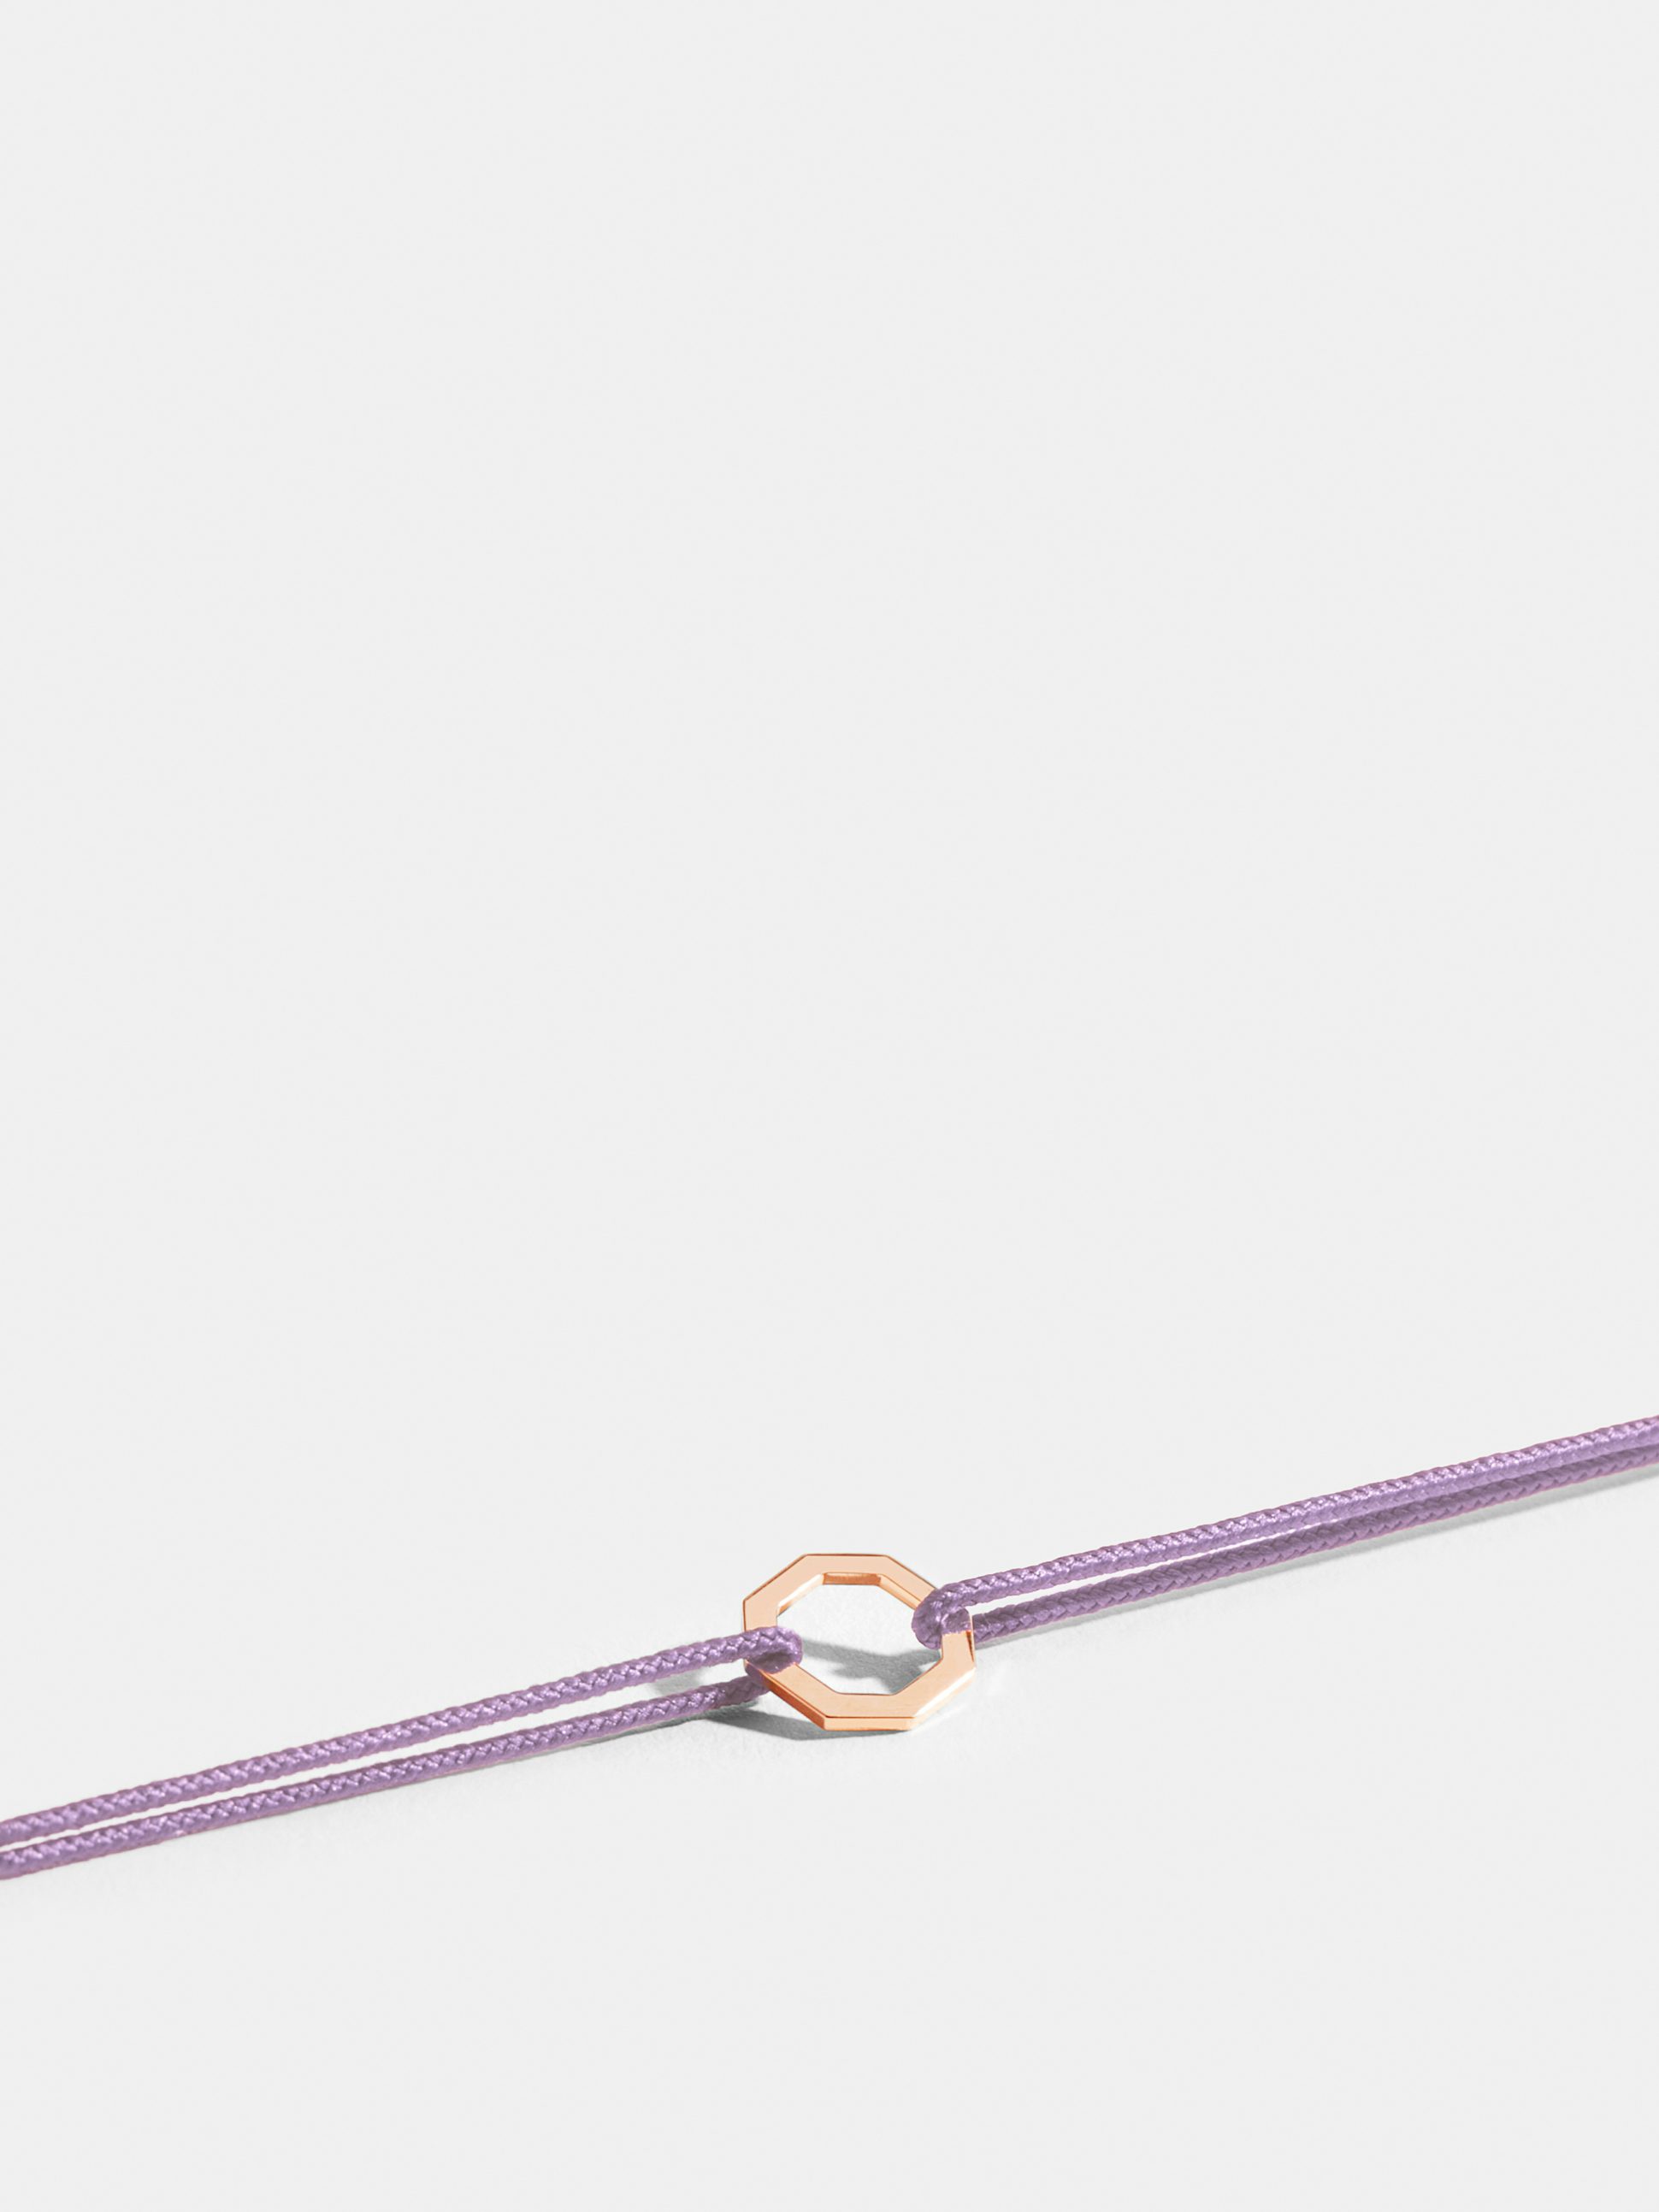 Octogone motif in 18k Fairmined ethical rose gold, on a lilac purple cord. 